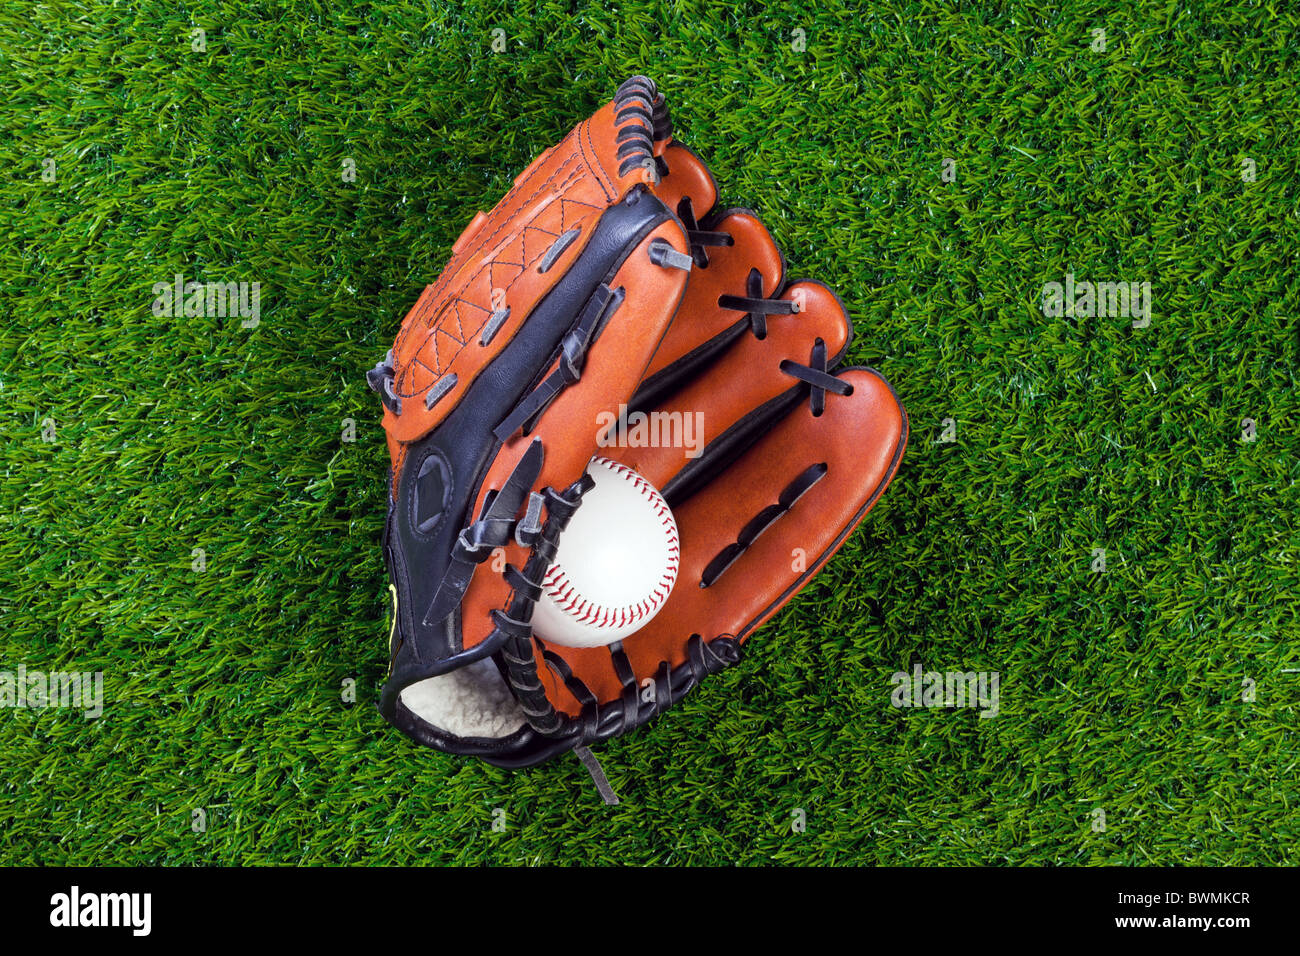 Photo of a baseball glove and ball on grass. Stock Photo